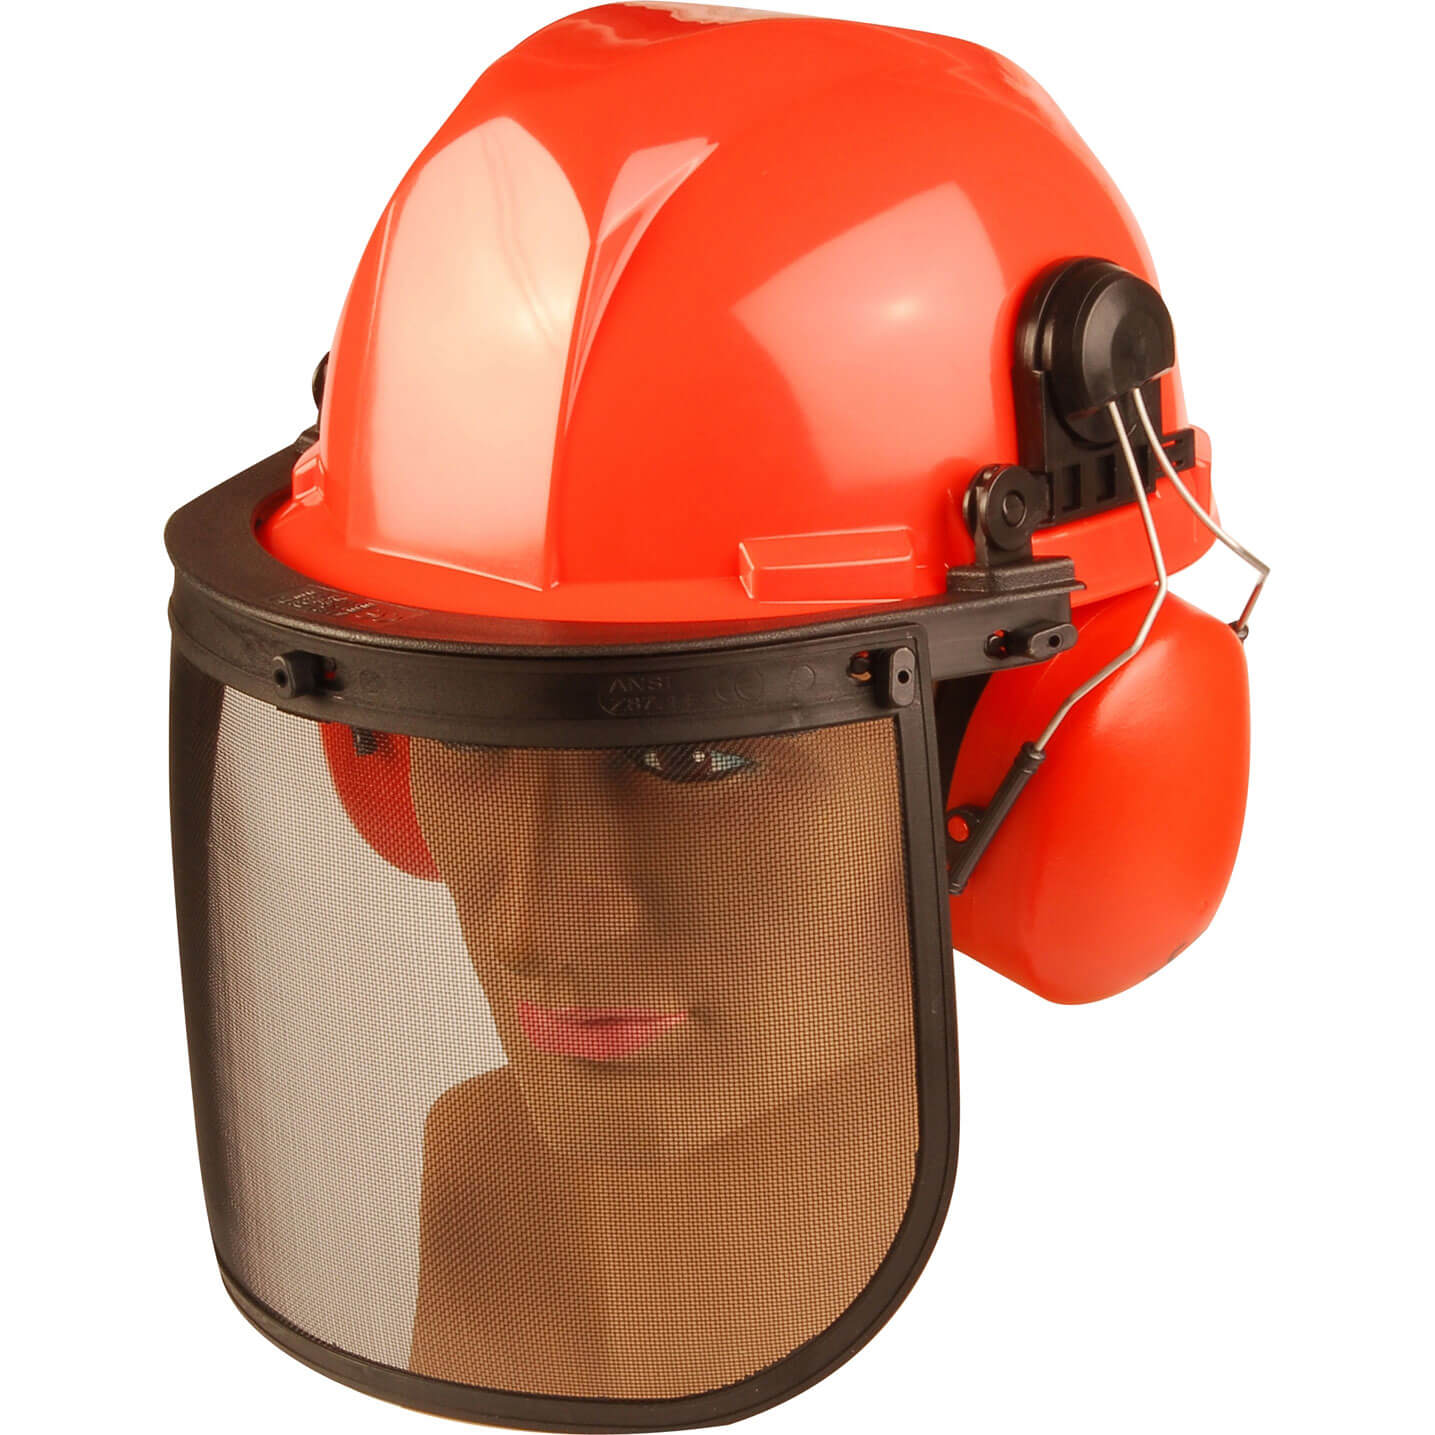 Photo of Alm Chainsaw Safety Helmet Mesh Visor And Ear Defenders